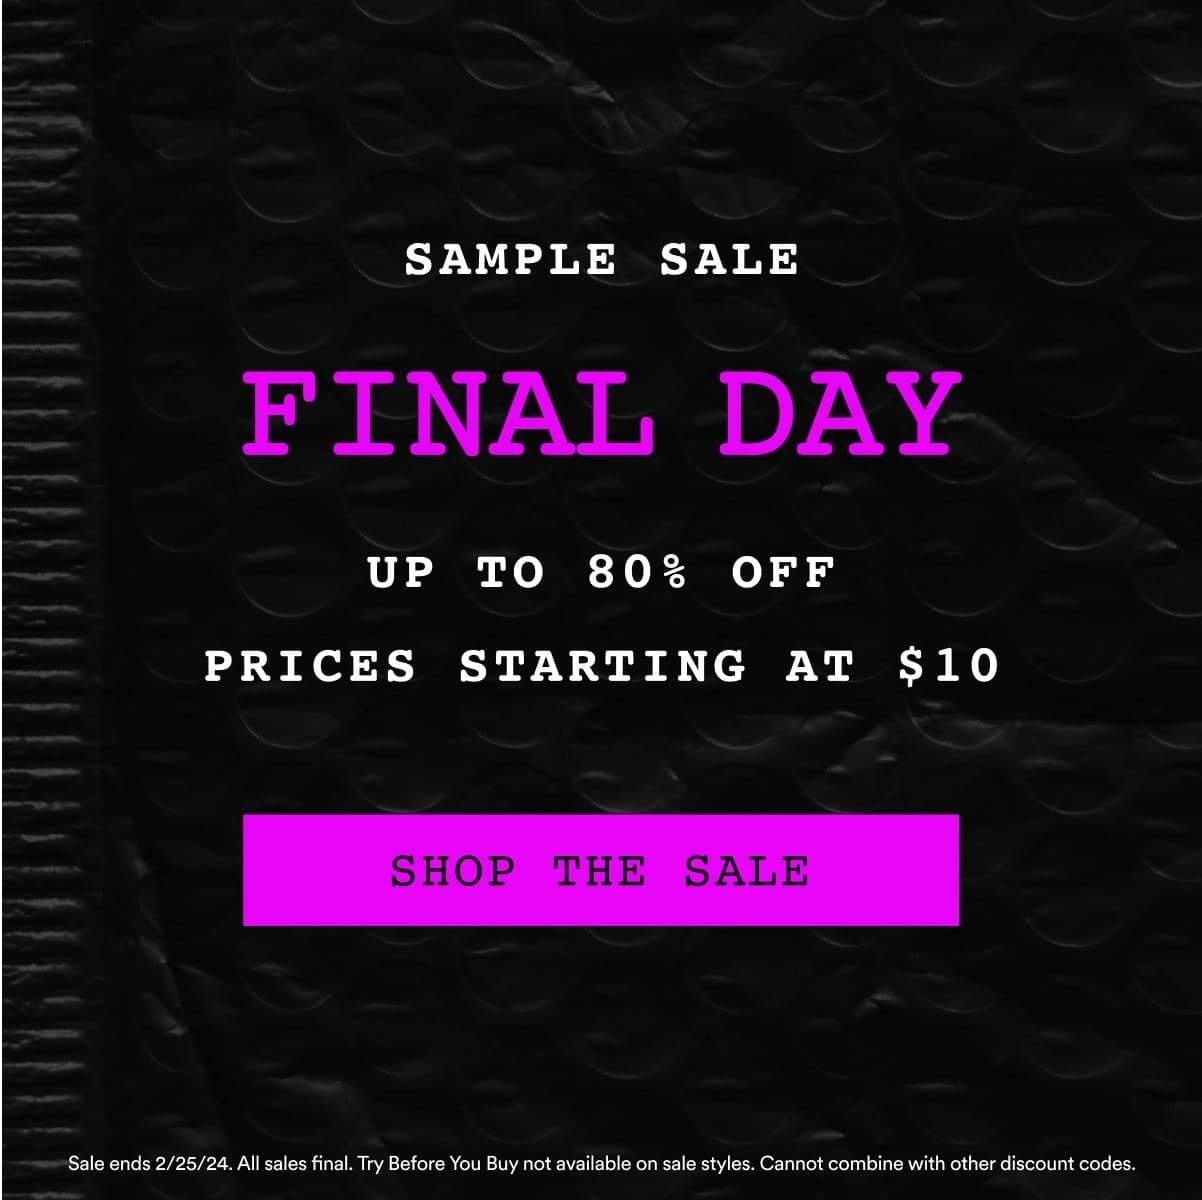 Sample Sale. 50 NEW STYLES ADDED. UP TO 80% OFF PRICES STARTING AT \\$10